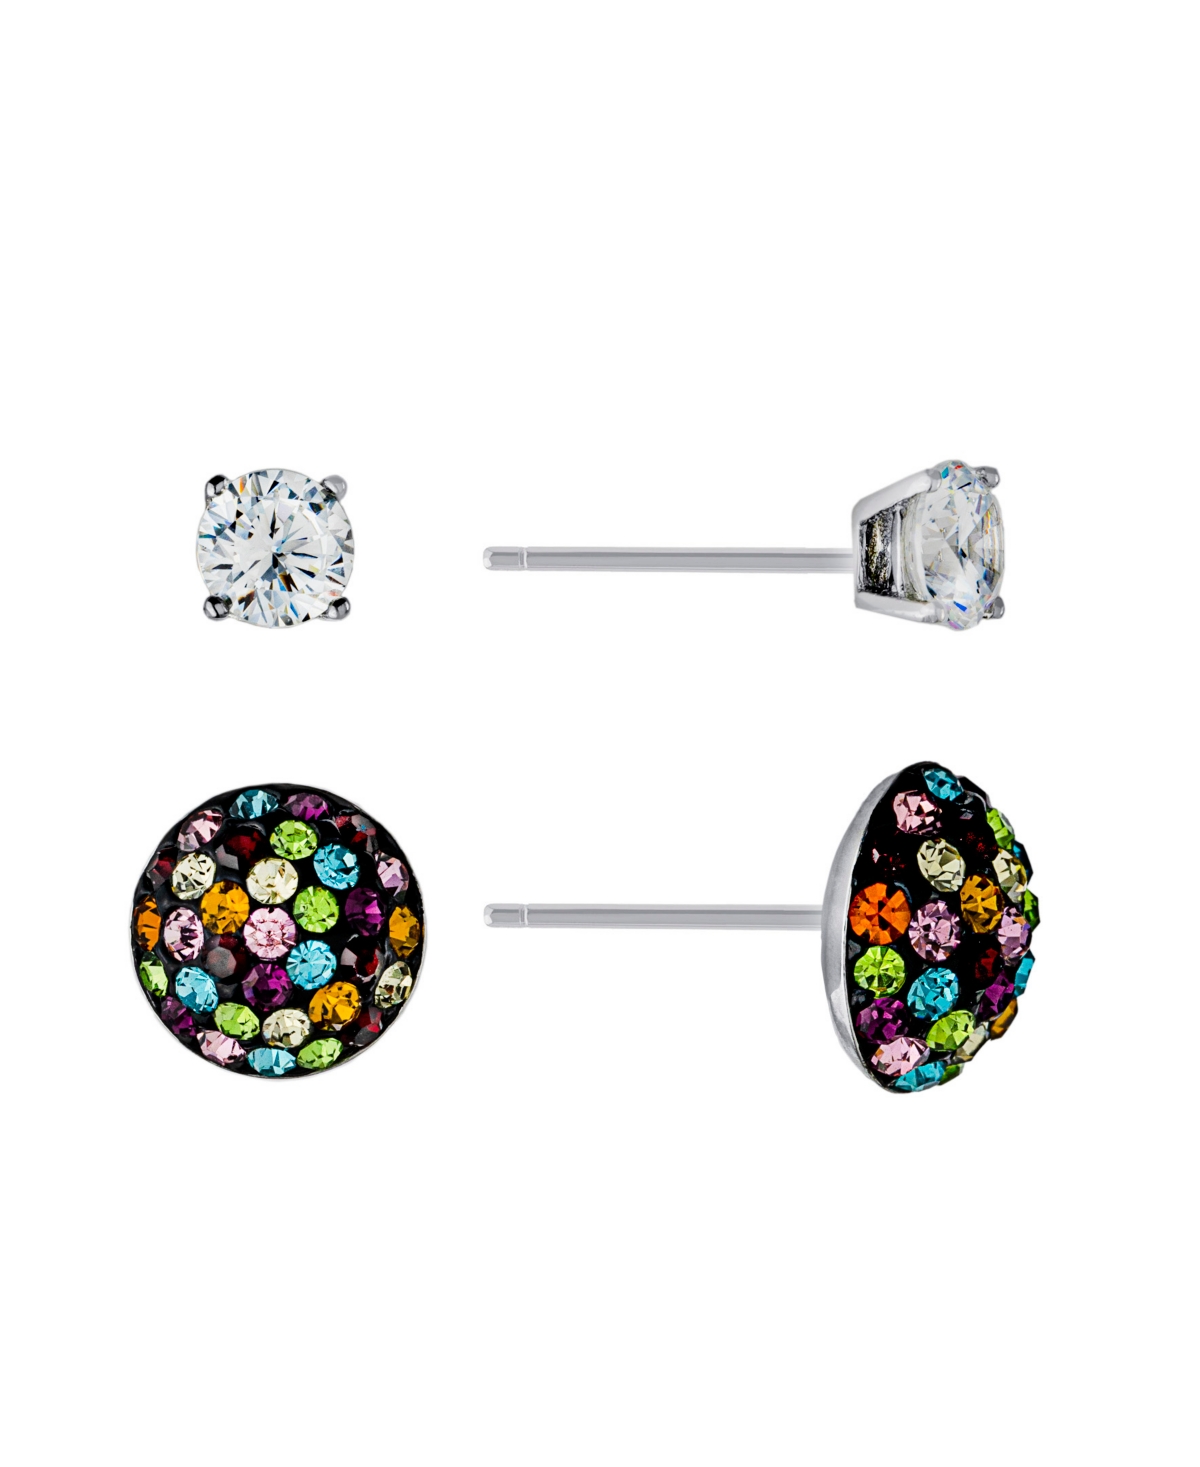 2-Pc. Set Cubic Zircona Solitaire & Cluster Stud Earrings in Sterling Silver, Created for Macy's - MULTI